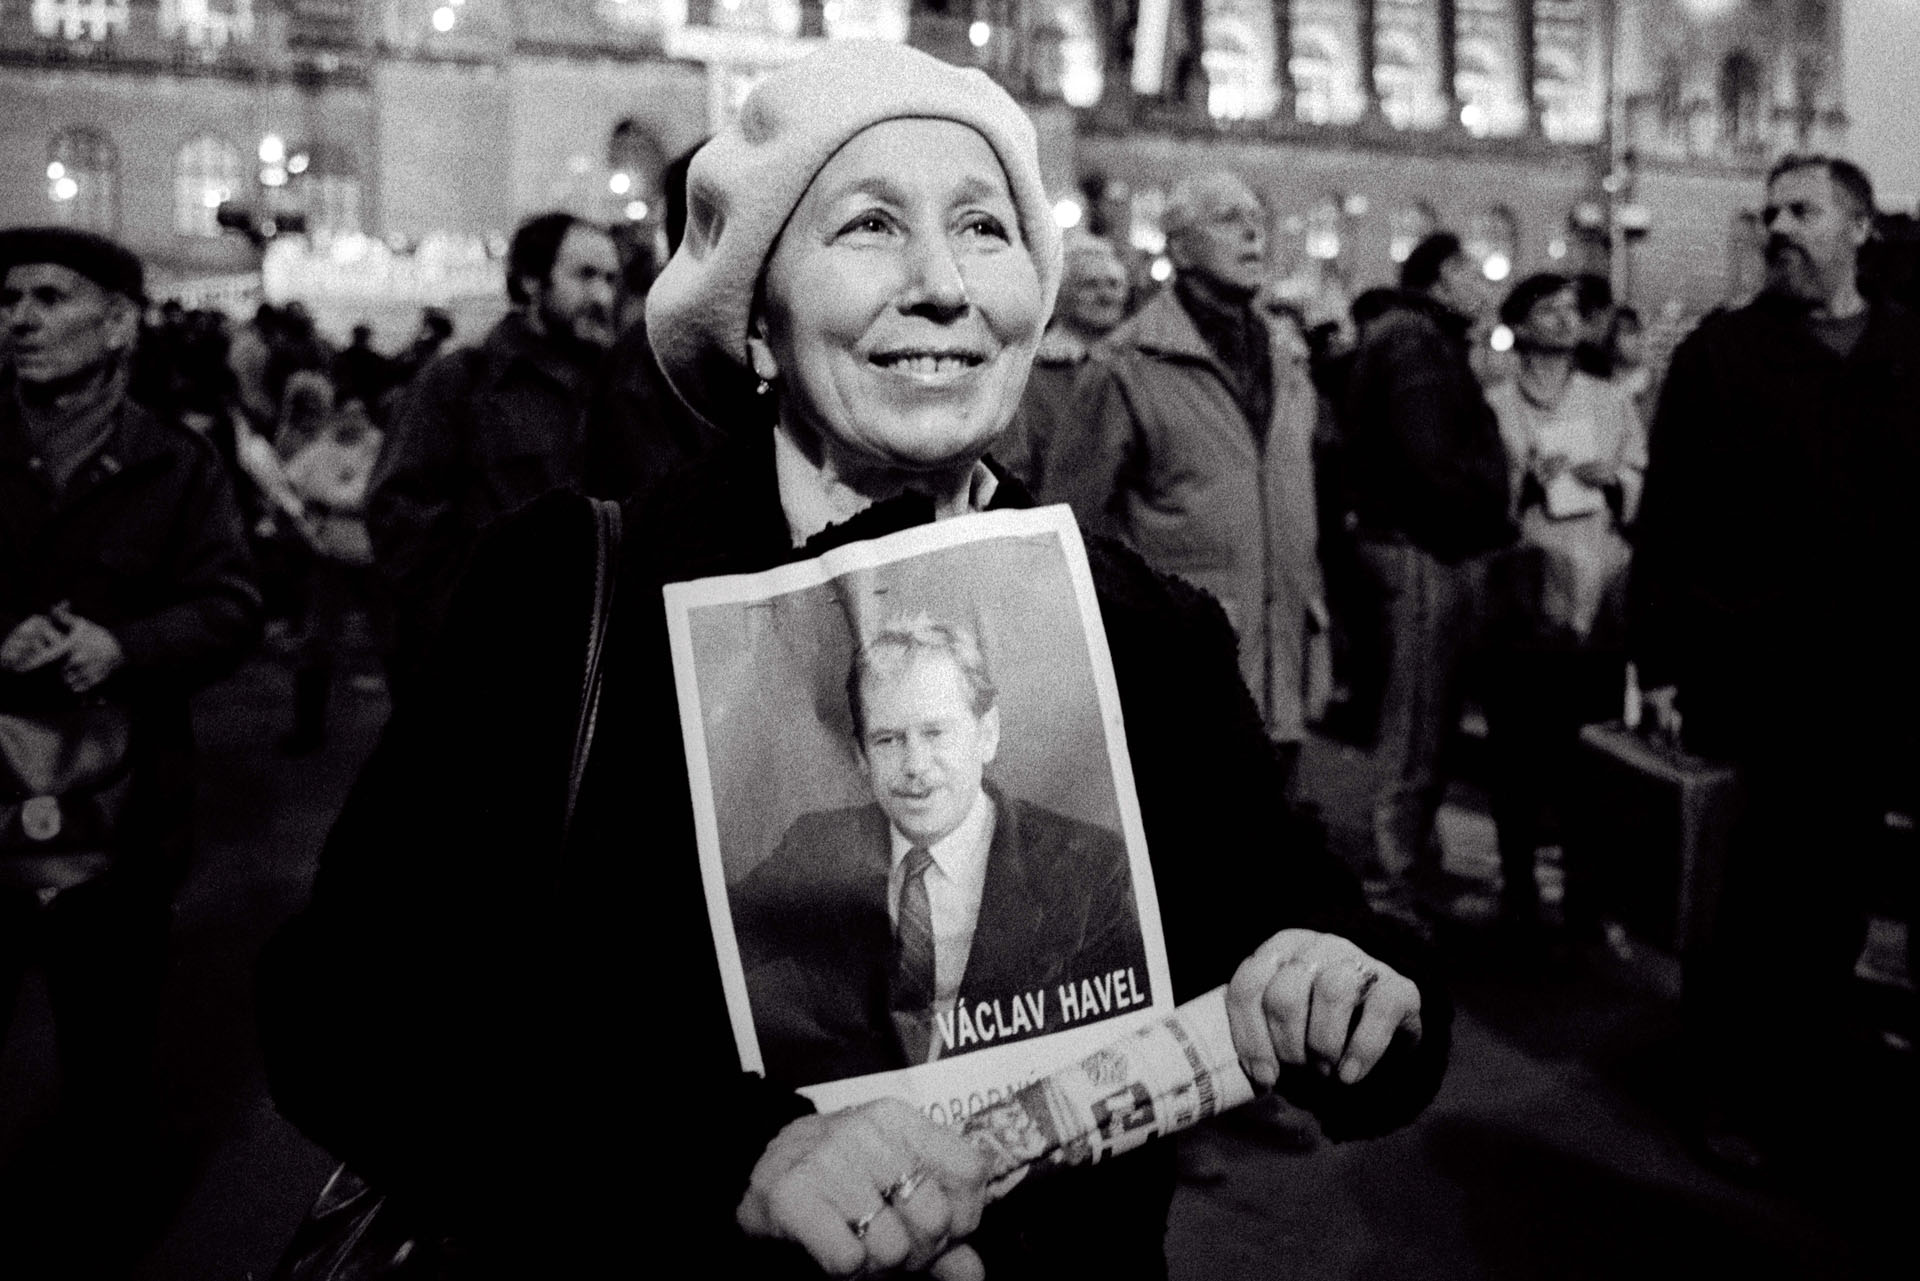 At a meeting of the Federal Assembly, the government proposed Václav Havel as a candidate for president. Citizens came to Prague from numerous cities to support the motion. December 19, 1989. Image: Karel Cudlín